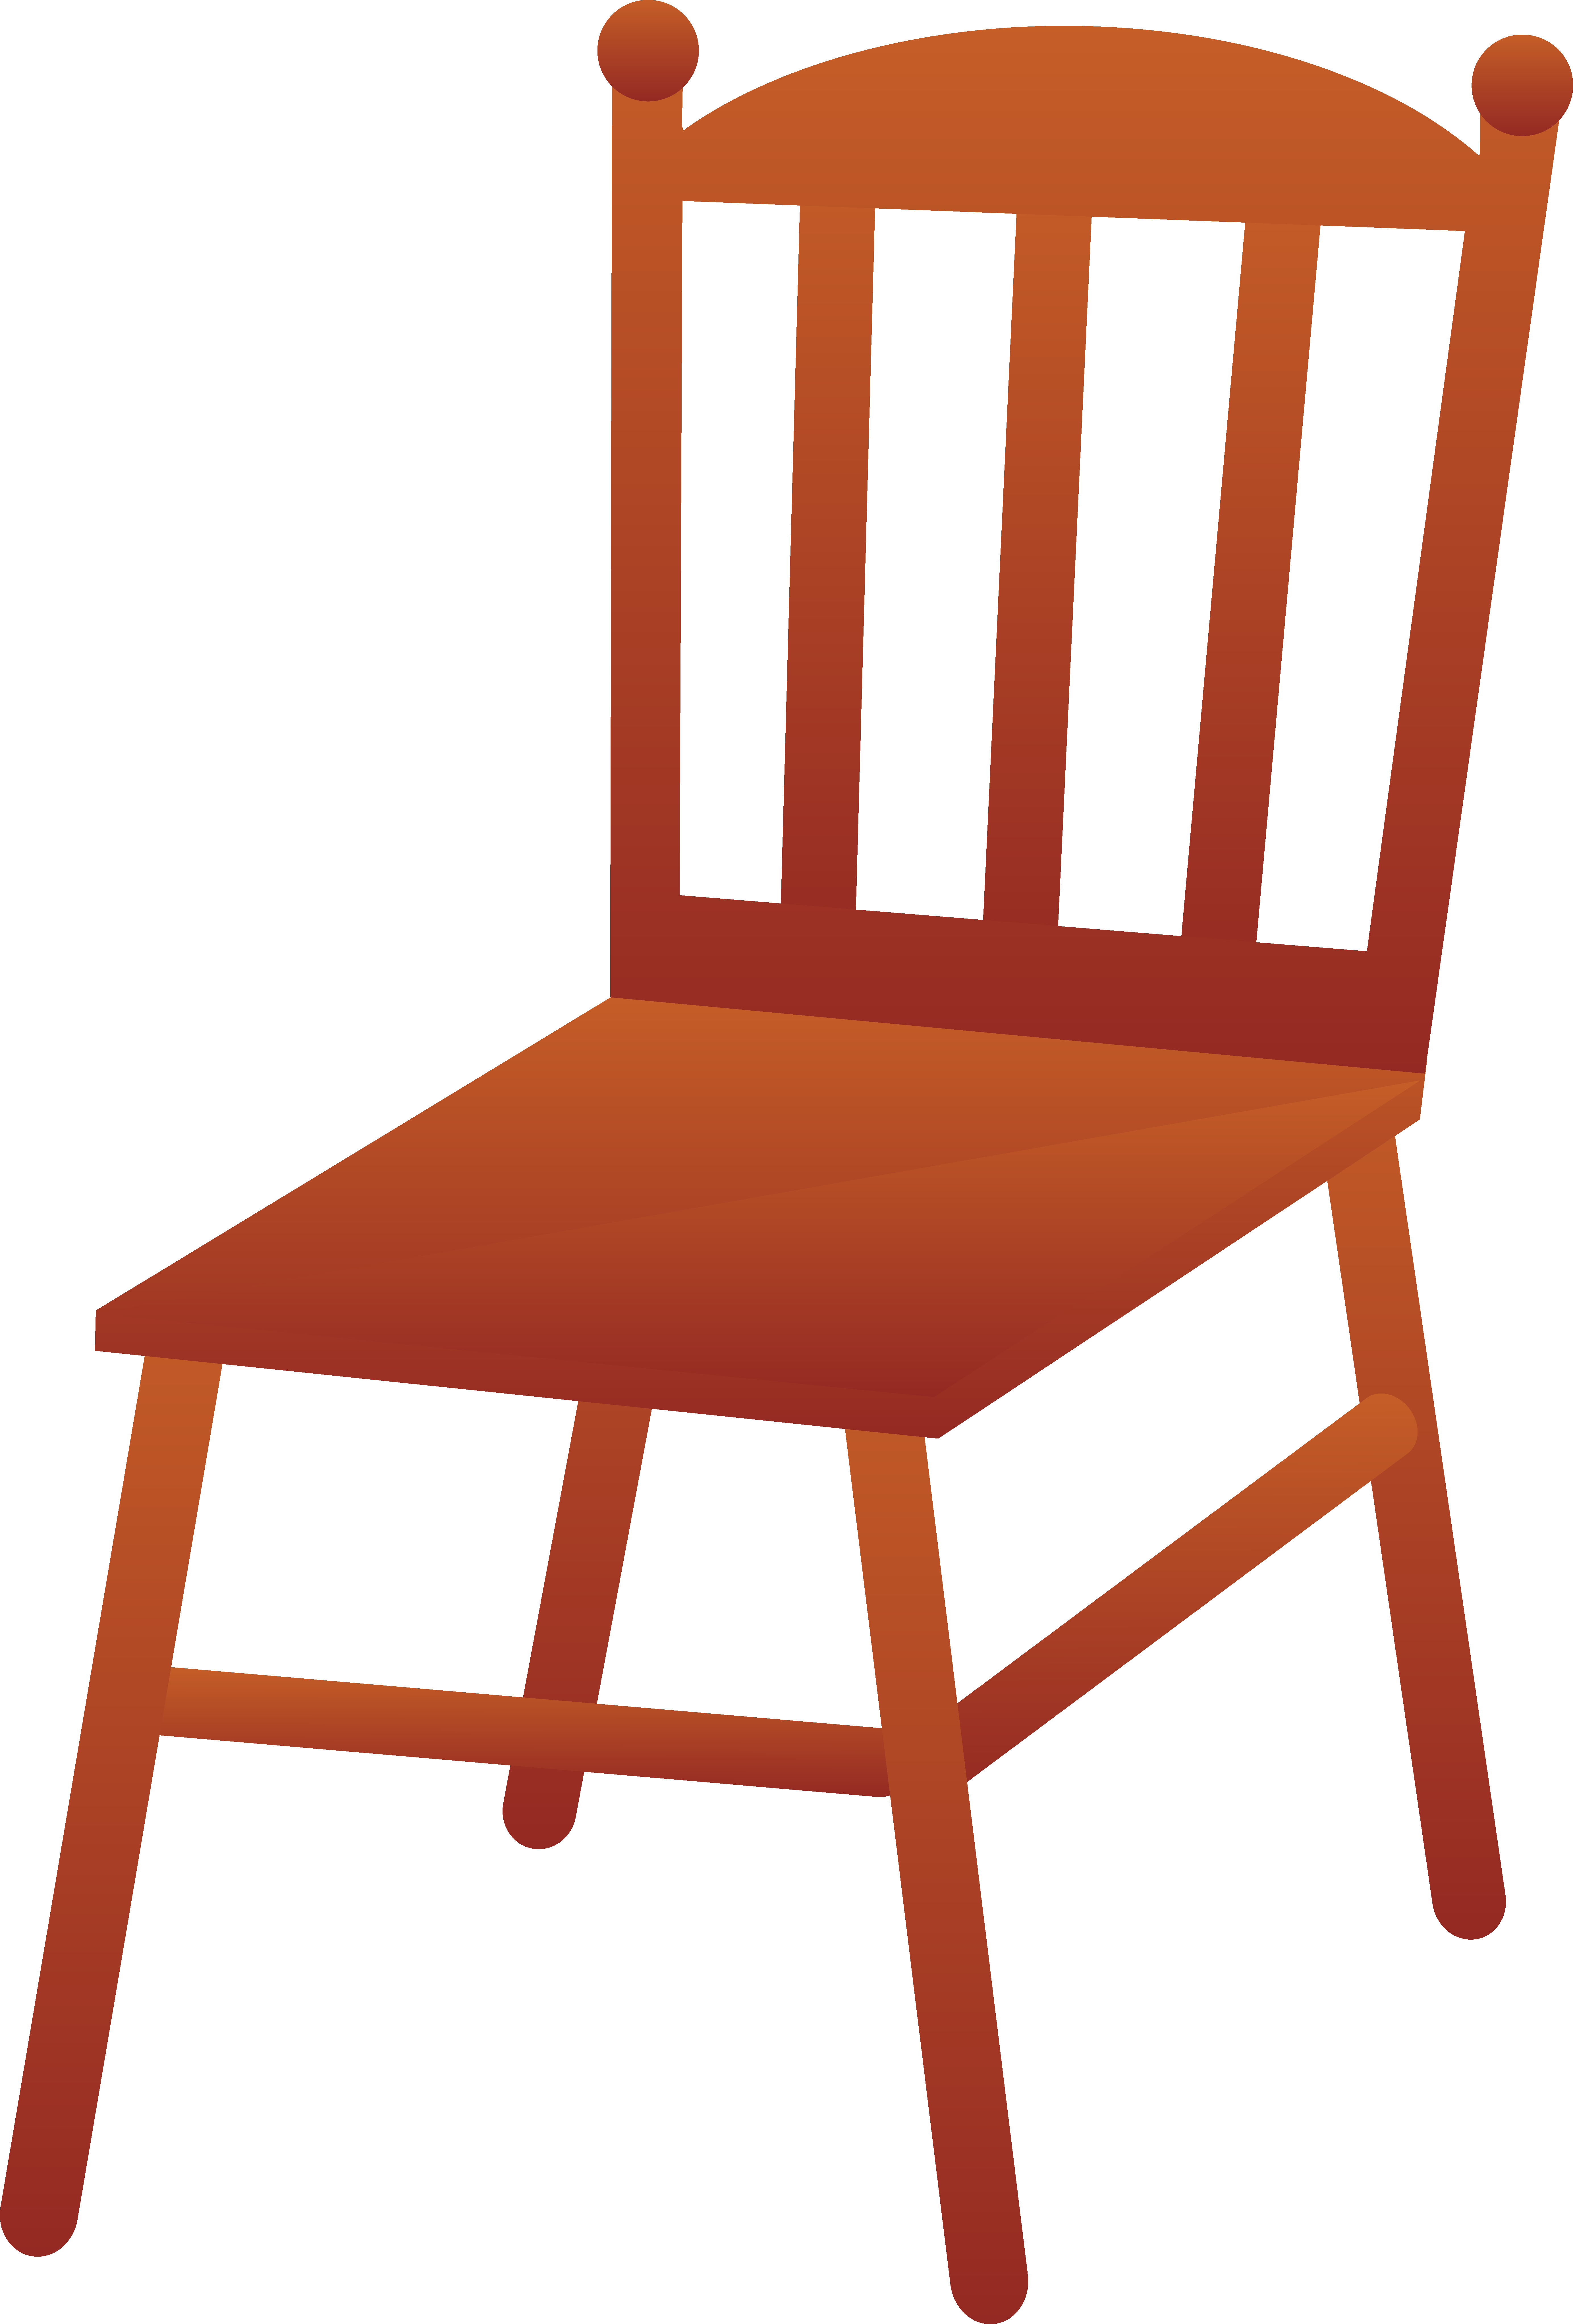 Free Chairs Cliparts Download Free Clip Art Free Clip Art On Clipart Library